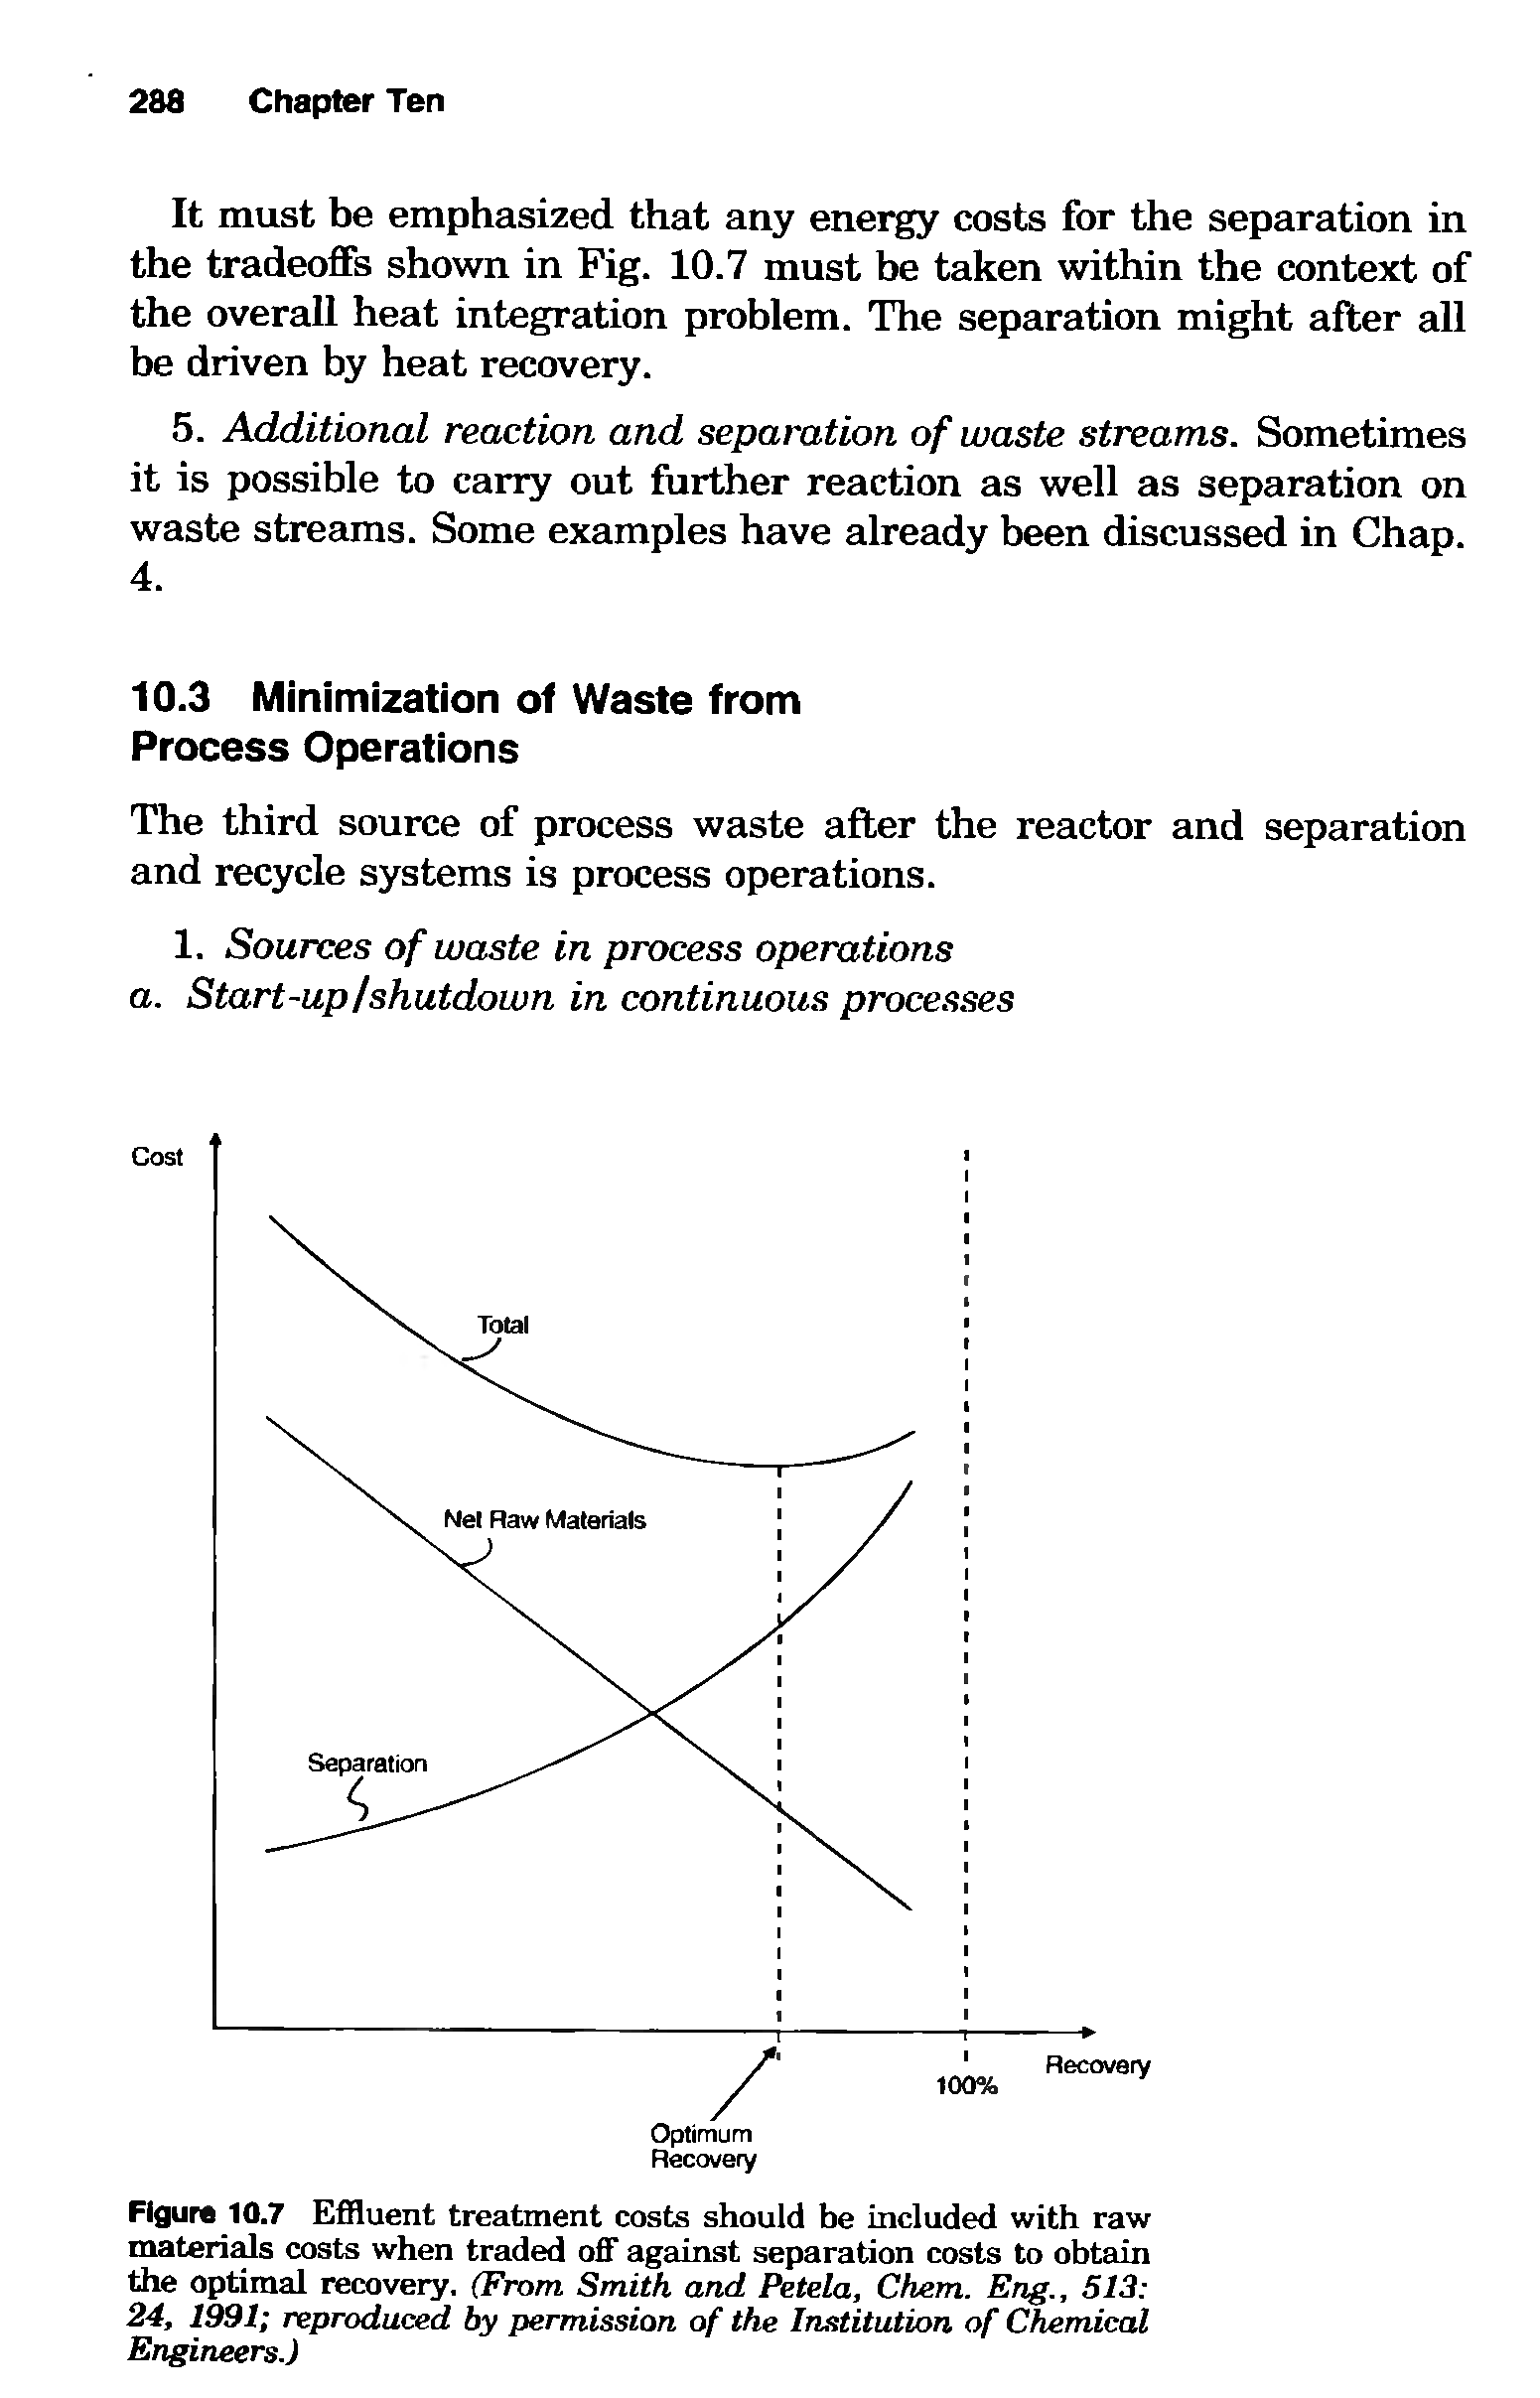 Figure 10.7 Effluent treatment costs should be included with raw materials costs when traded off against separation costs to obtain the optimal recovery. (From Smith and Petela, Chem. Eng., 513 24, 1991 reproduced by permission of the Institution of Chemical Engineers.)...